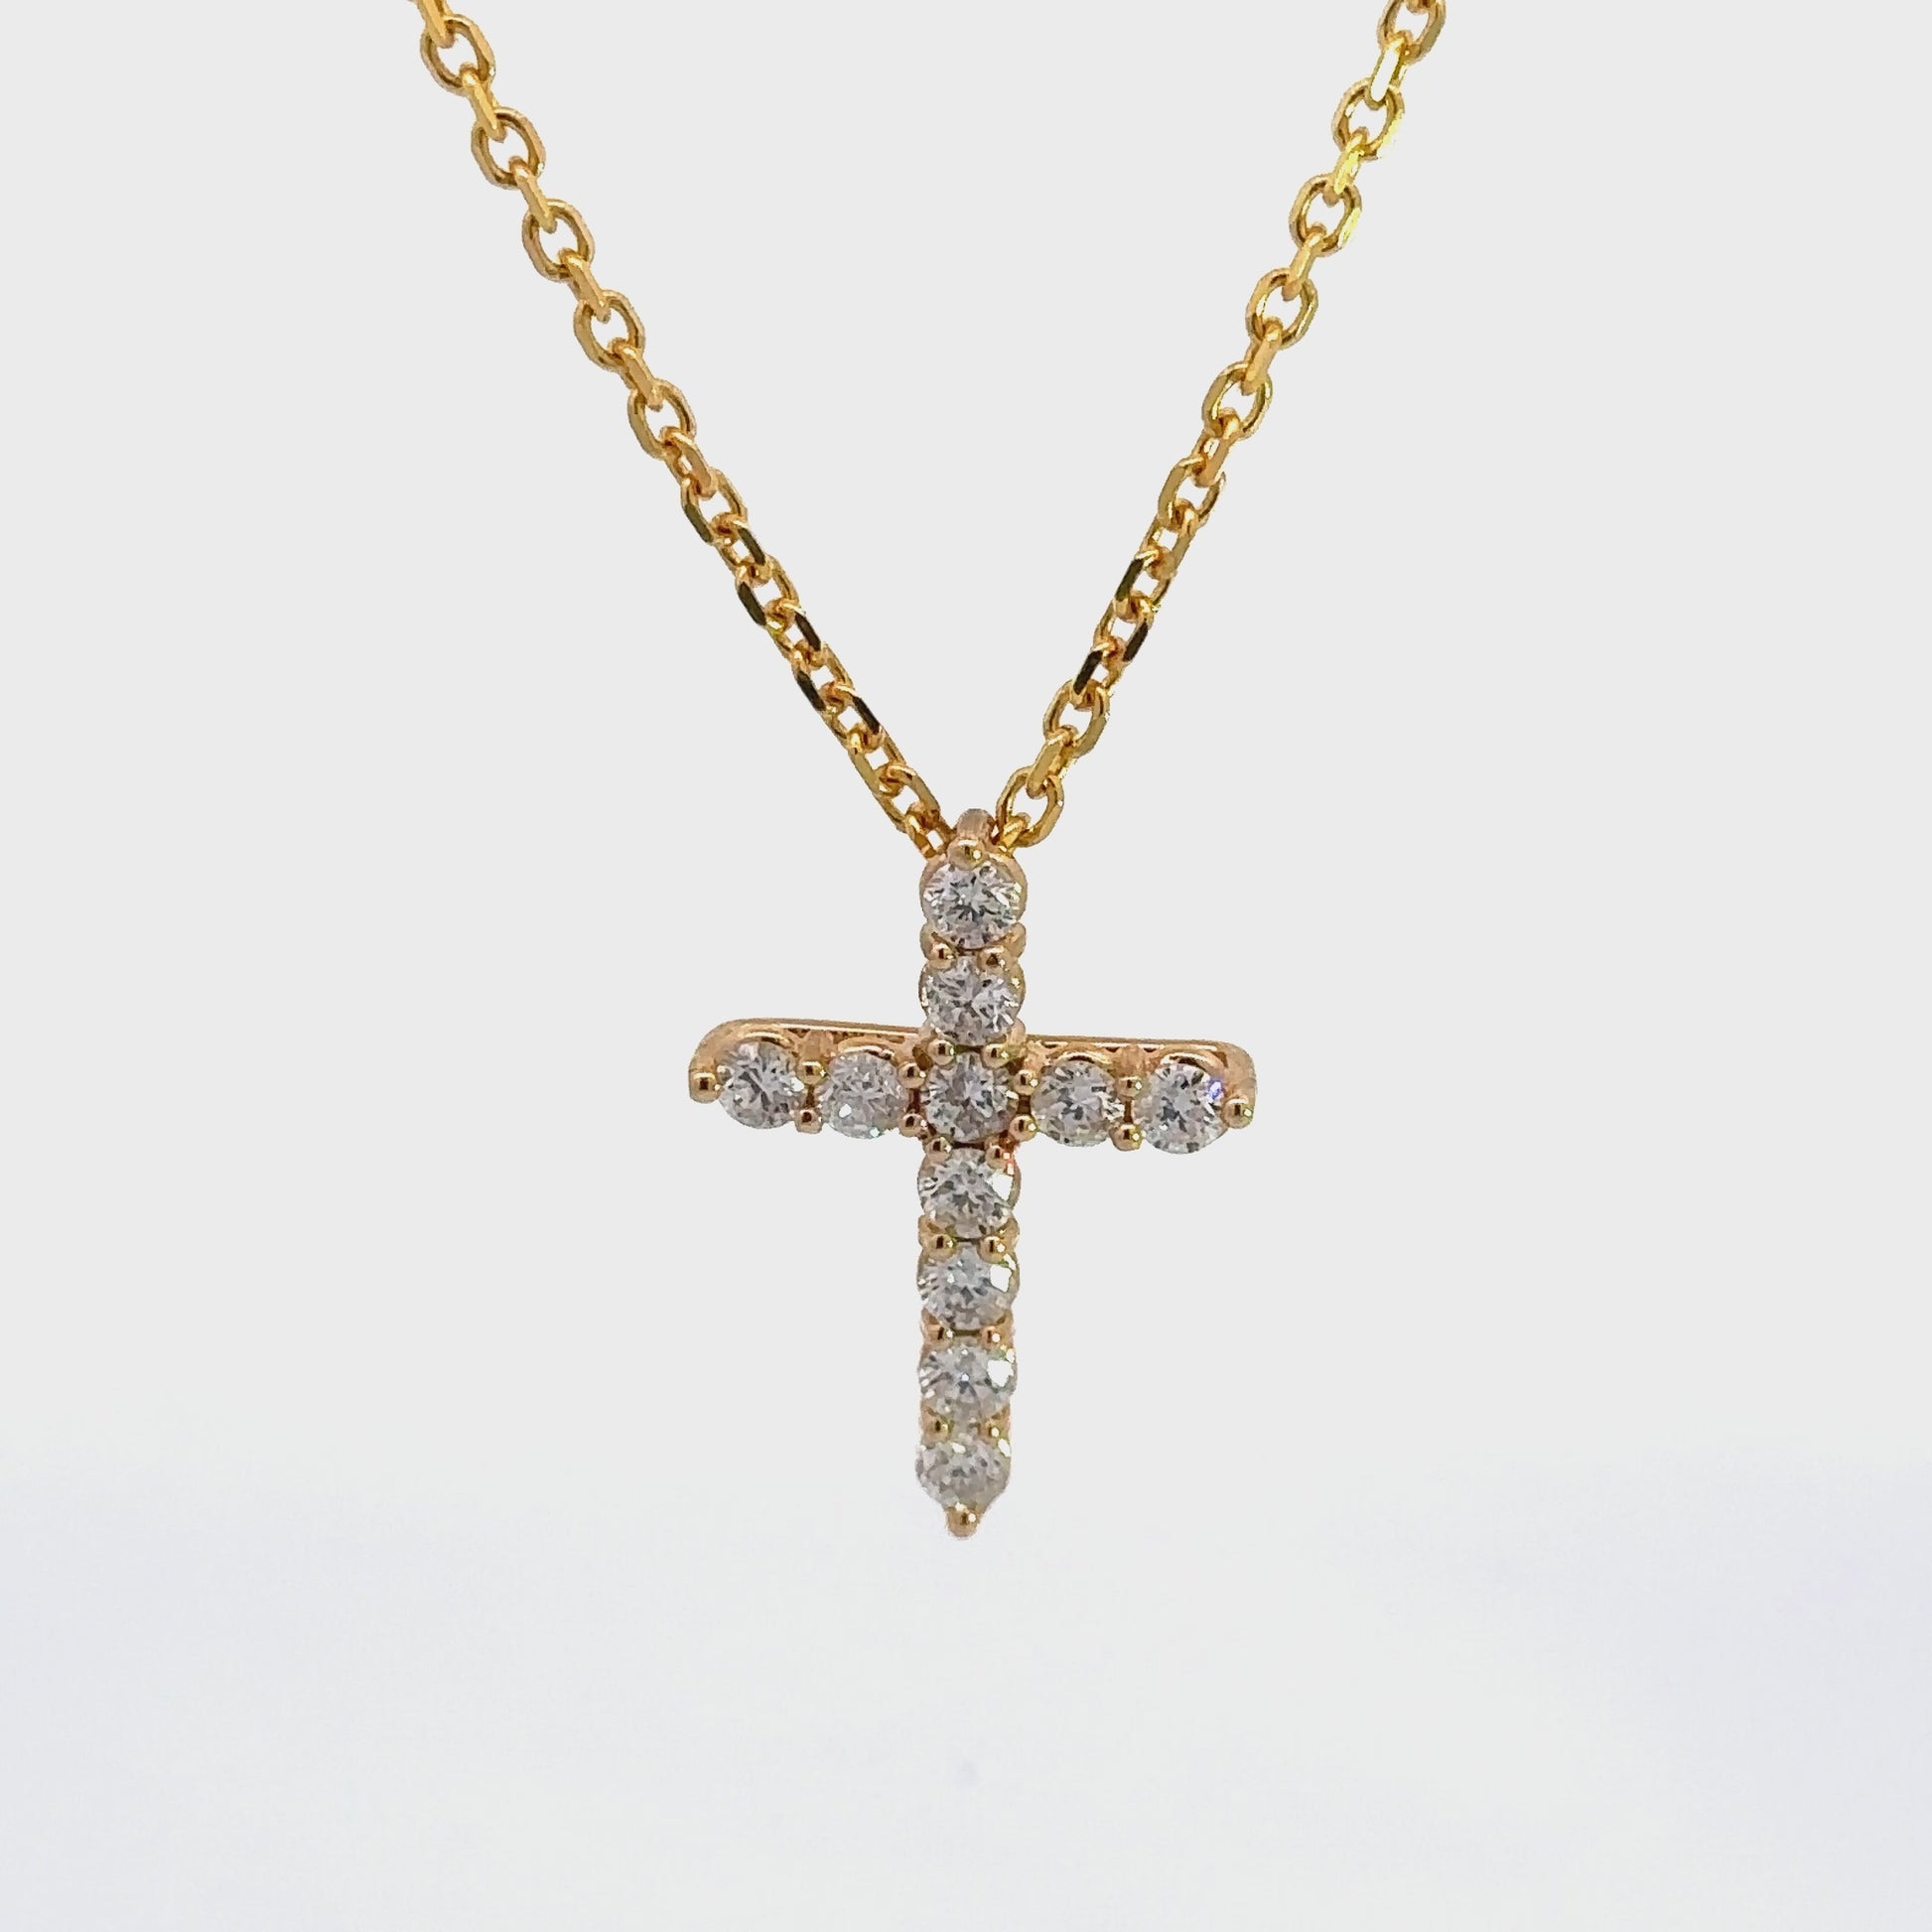 360 Video of Diamond Cross necklace with a thin yellow gold link chain and 11 round diamonds on cross.